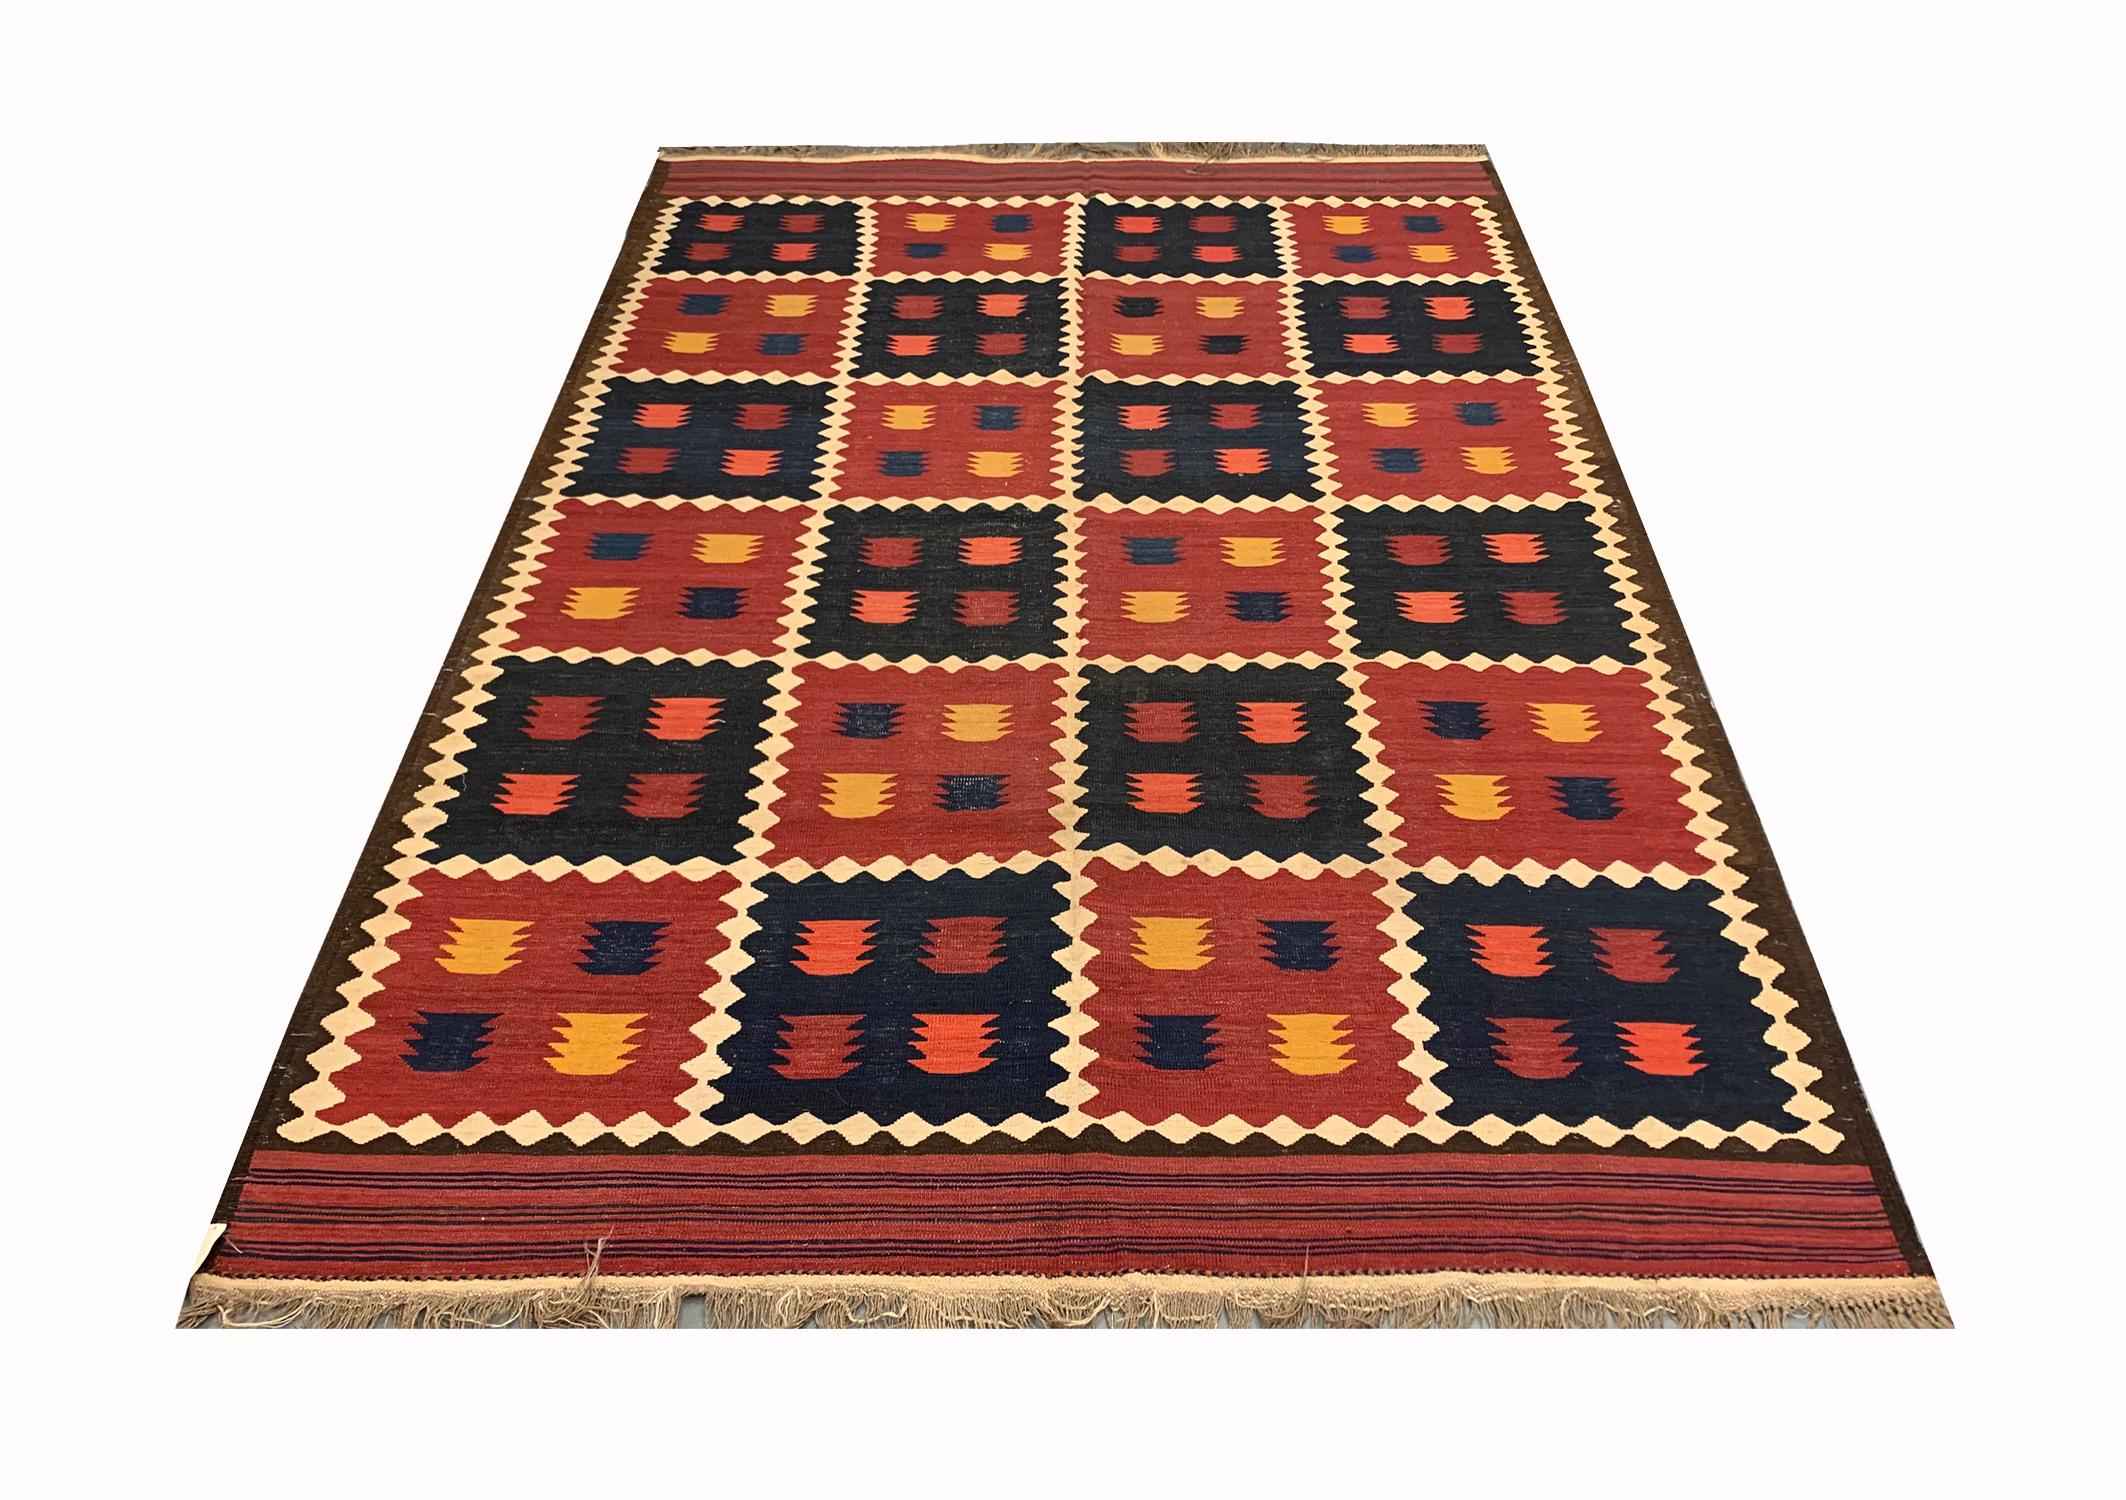 An antique masterpiece, this fine wool Kilim was woven in the late 19th century Circa 1890. The design reveals a bold pattern with a square repeating pattern in deep blue and red colours, and motifs are woven in mustard blue and red. This is then